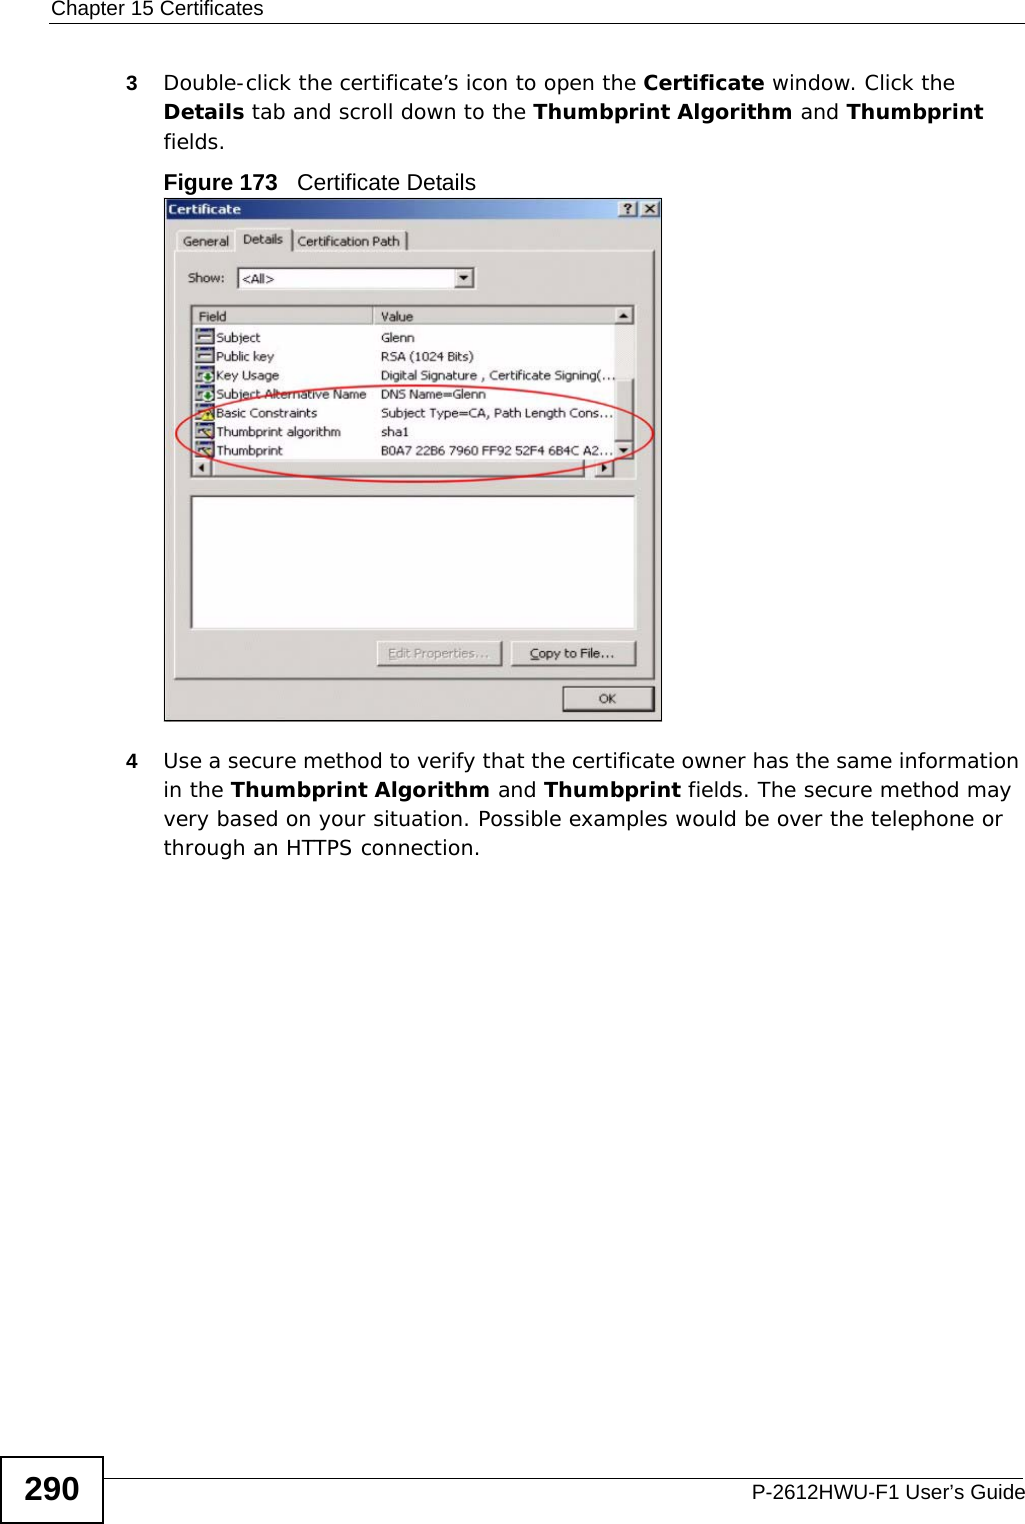 Chapter 15 CertificatesP-2612HWU-F1 User’s Guide2903Double-click the certificate’s icon to open the Certificate window. Click the Details tab and scroll down to the Thumbprint Algorithm and Thumbprint fields.Figure 173   Certificate Details 4Use a secure method to verify that the certificate owner has the same information in the Thumbprint Algorithm and Thumbprint fields. The secure method may very based on your situation. Possible examples would be over the telephone or through an HTTPS connection. 